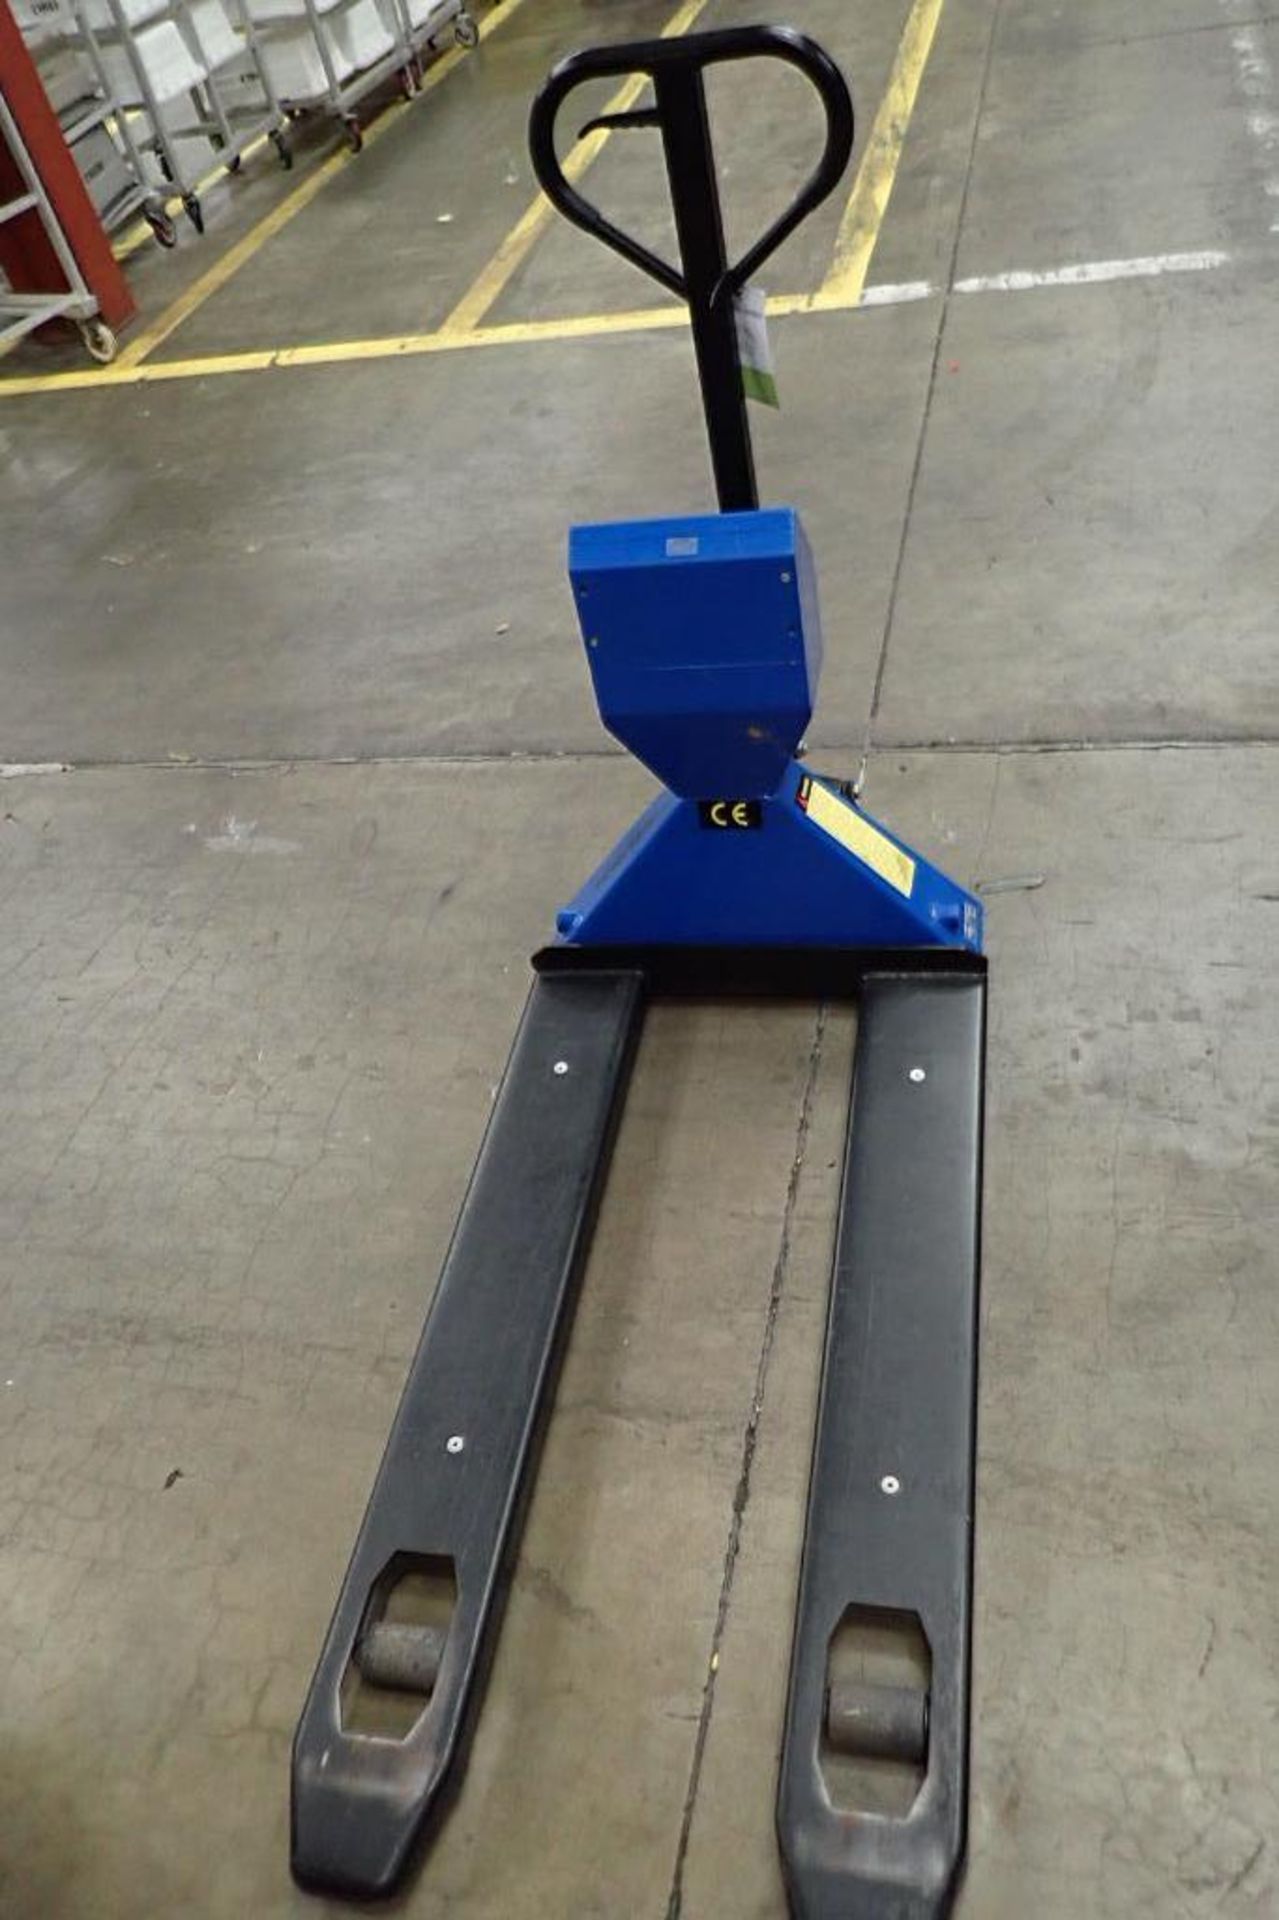 Global Industrial hand pallet jack, SN 382336 with Mettler Toledo on board scale, 5000 lb capacity, - Image 2 of 6